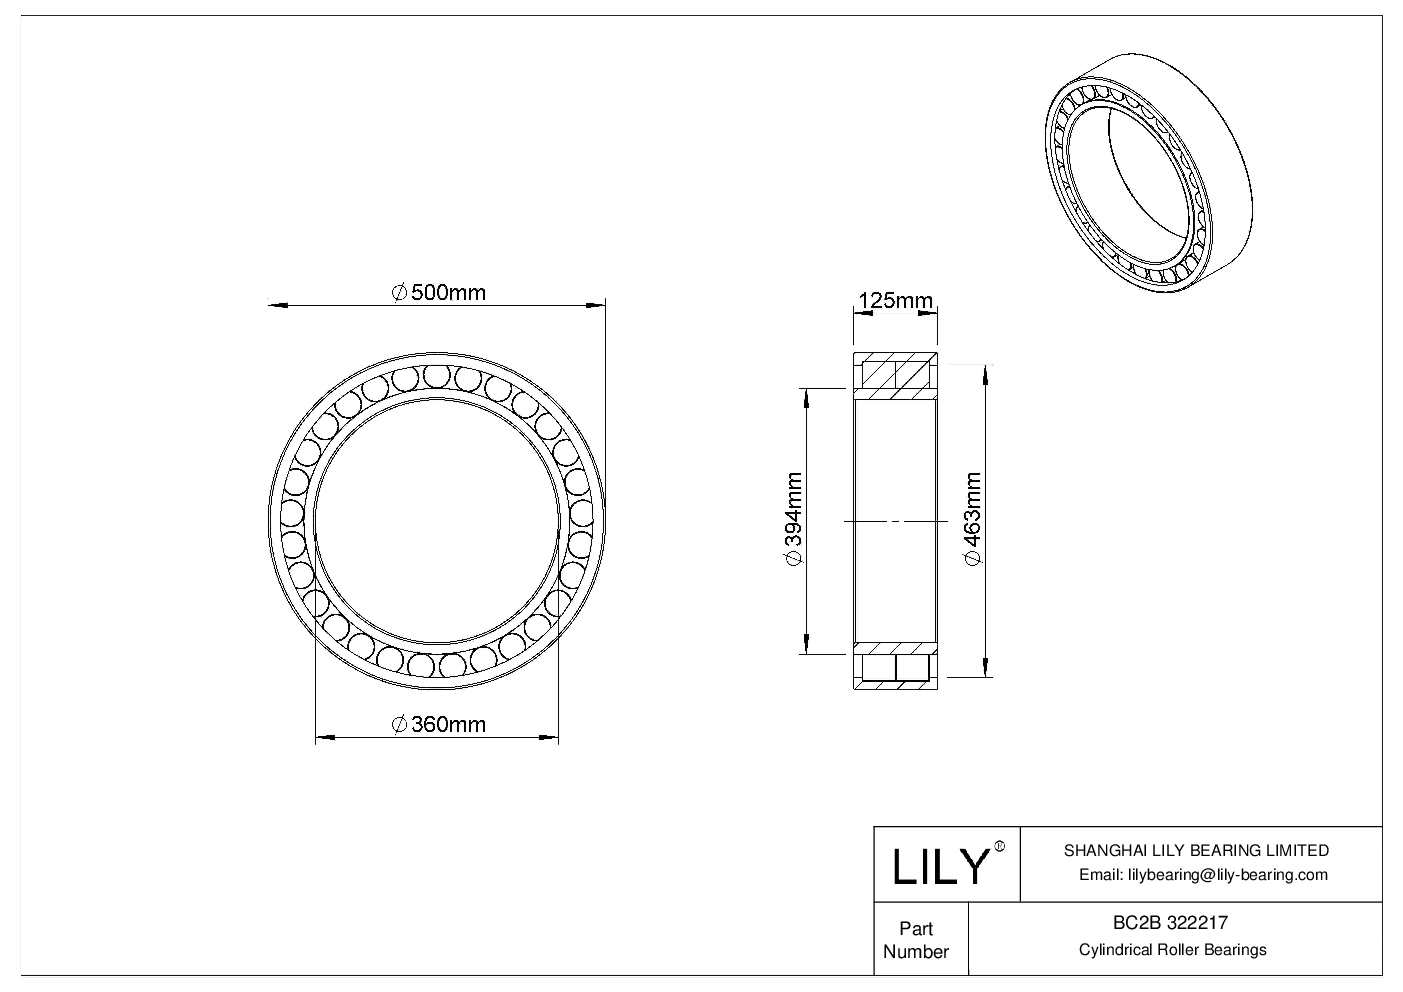 BC2B 322217 Double Row Cylindrical Roller Bearings cad drawing